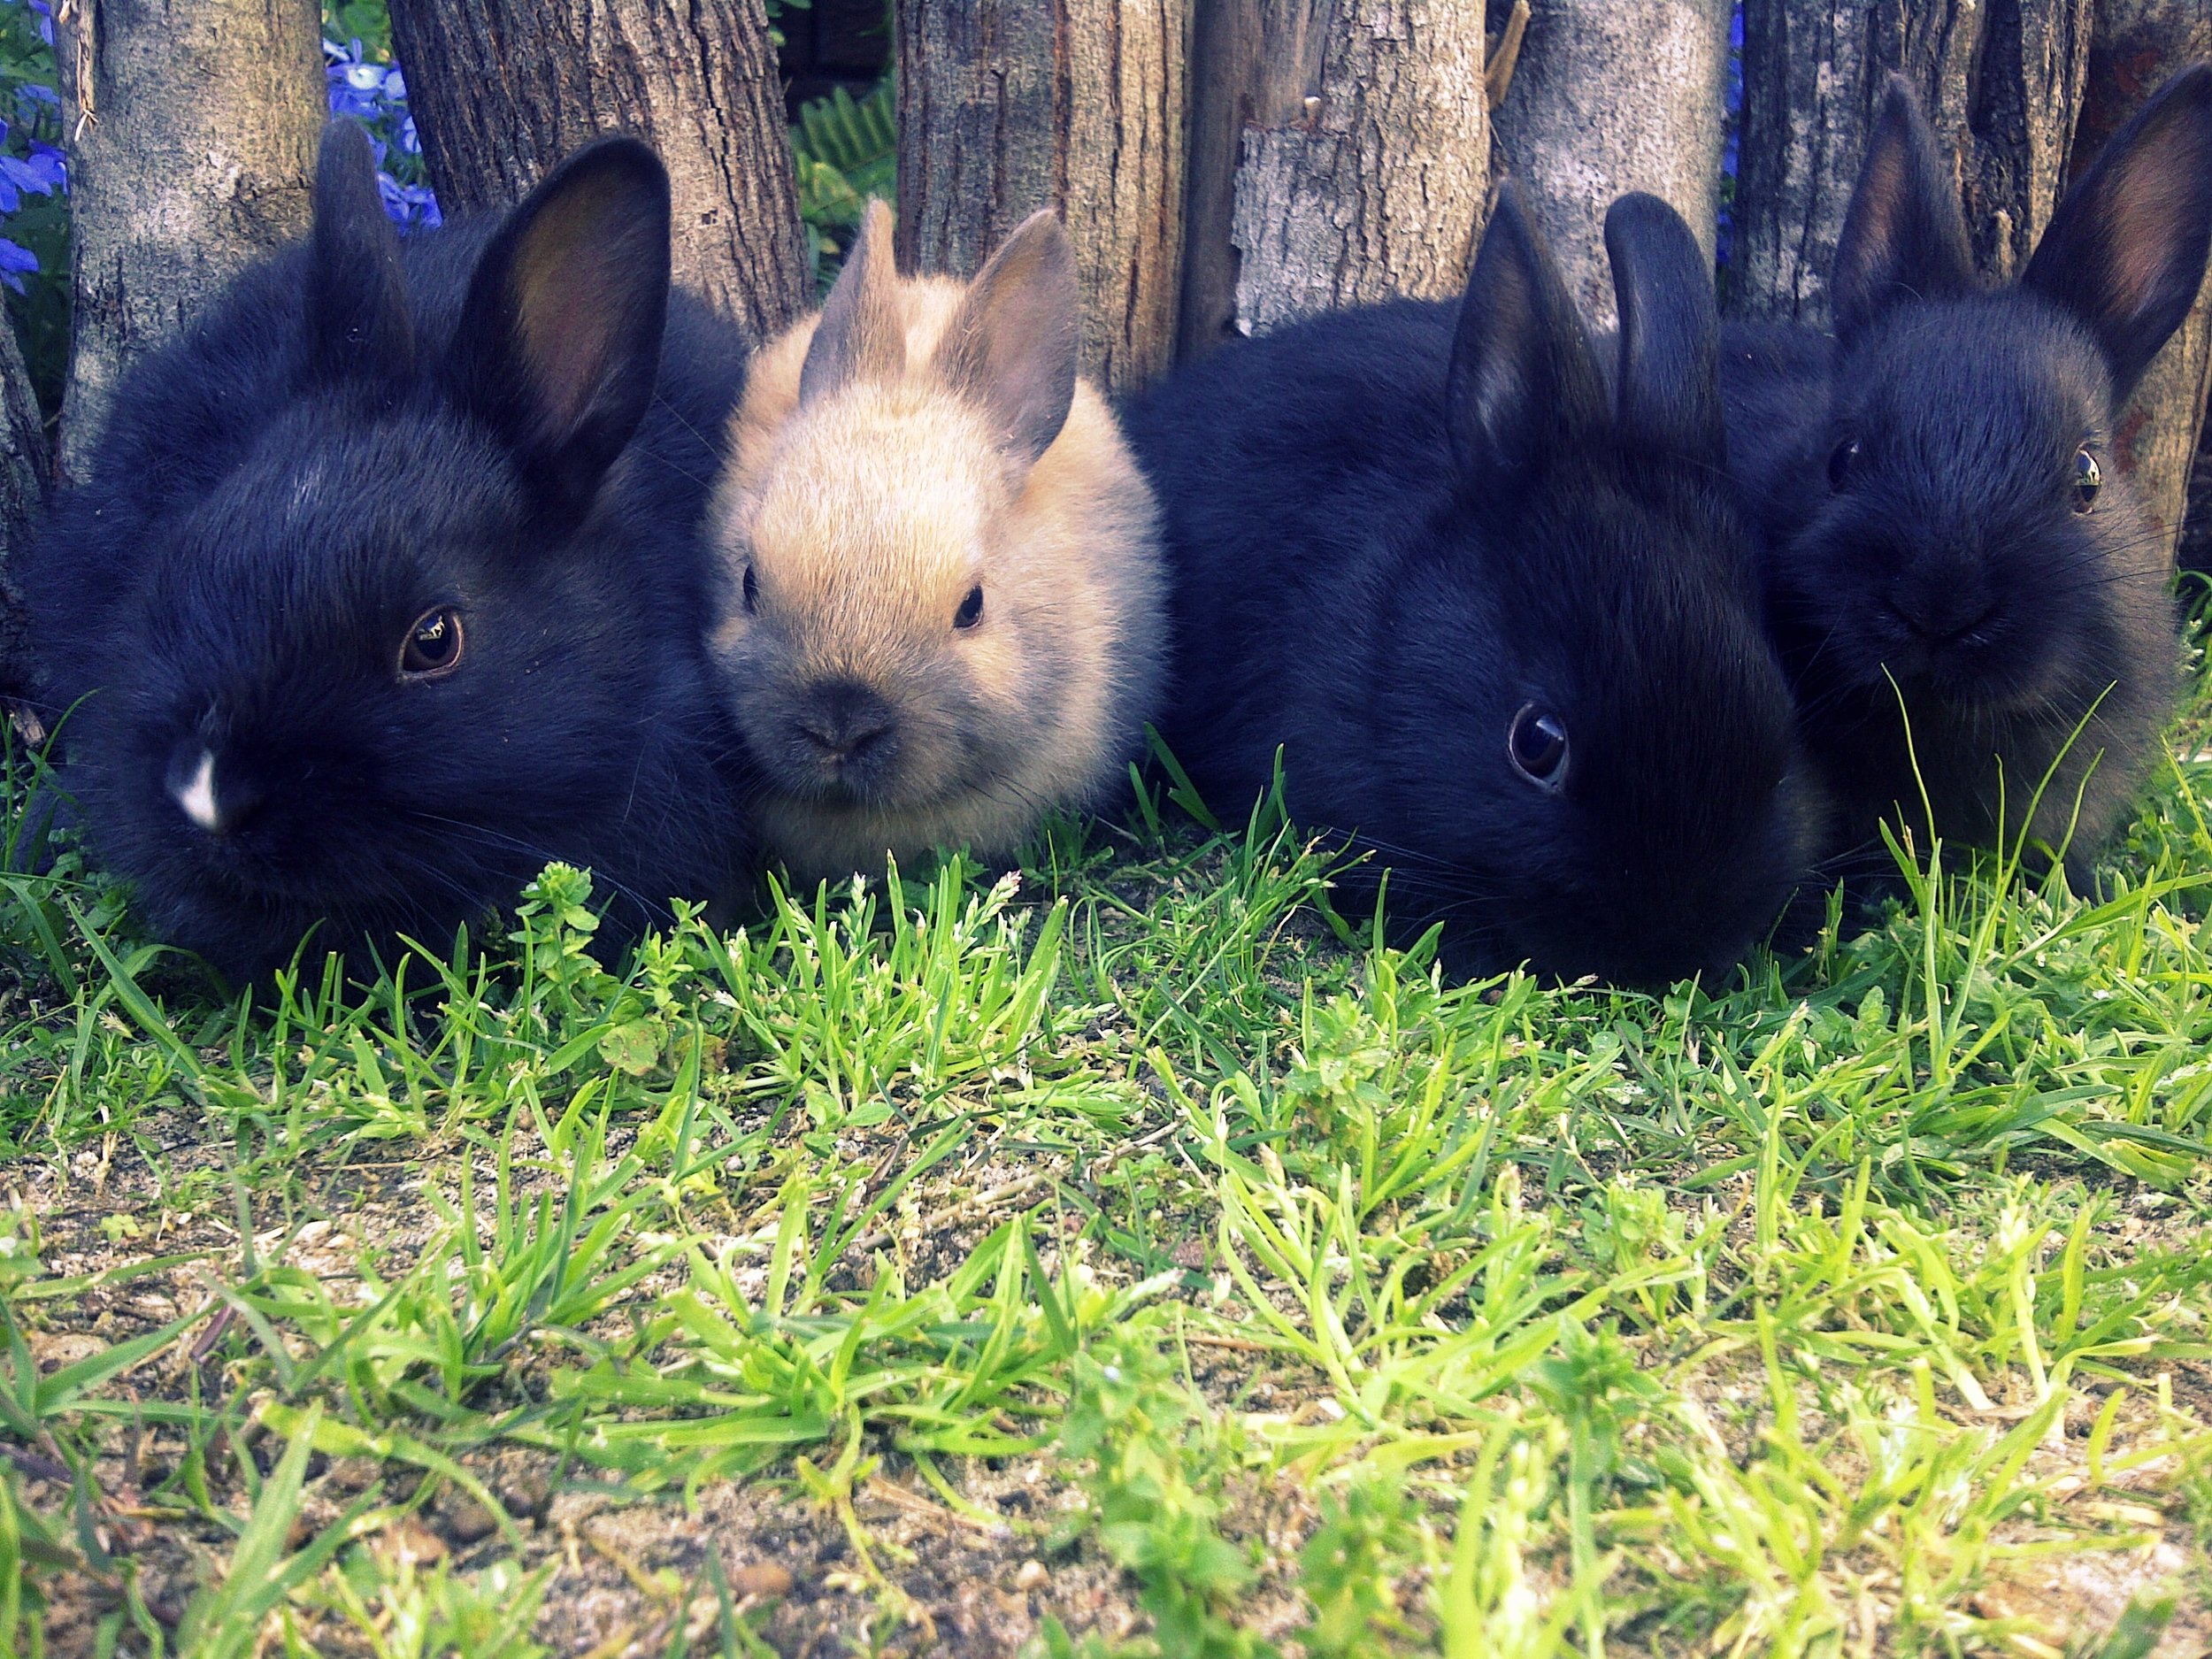 Will Human Correctly Pick Out from the Lineup the Bunny Who Got into the Garden?